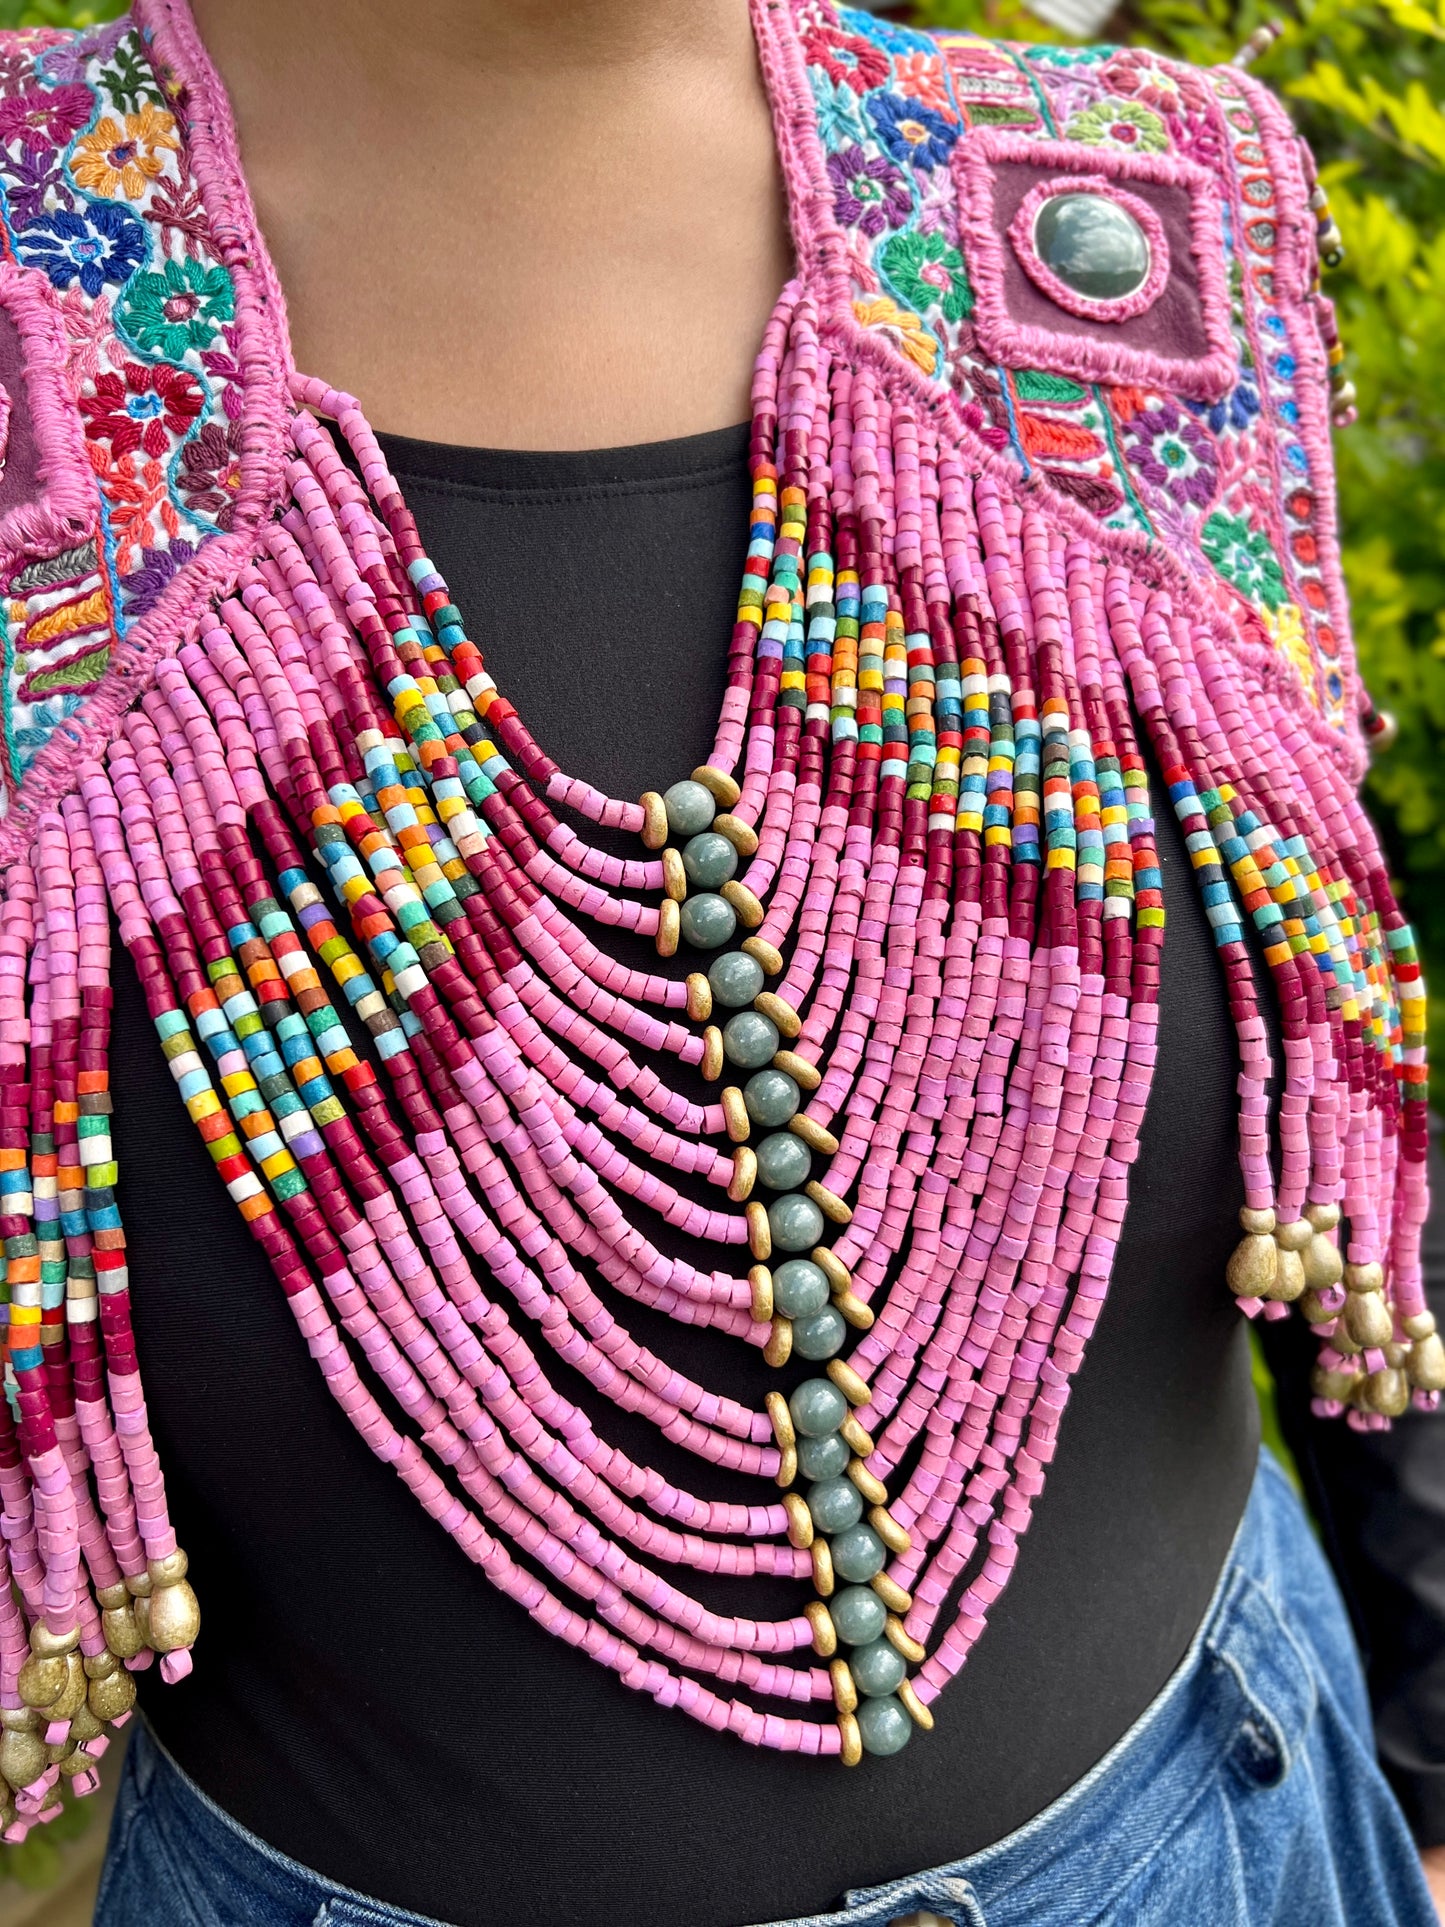 Textile Chest Piece with Chains, Fringes, and Jade - "Barbie"